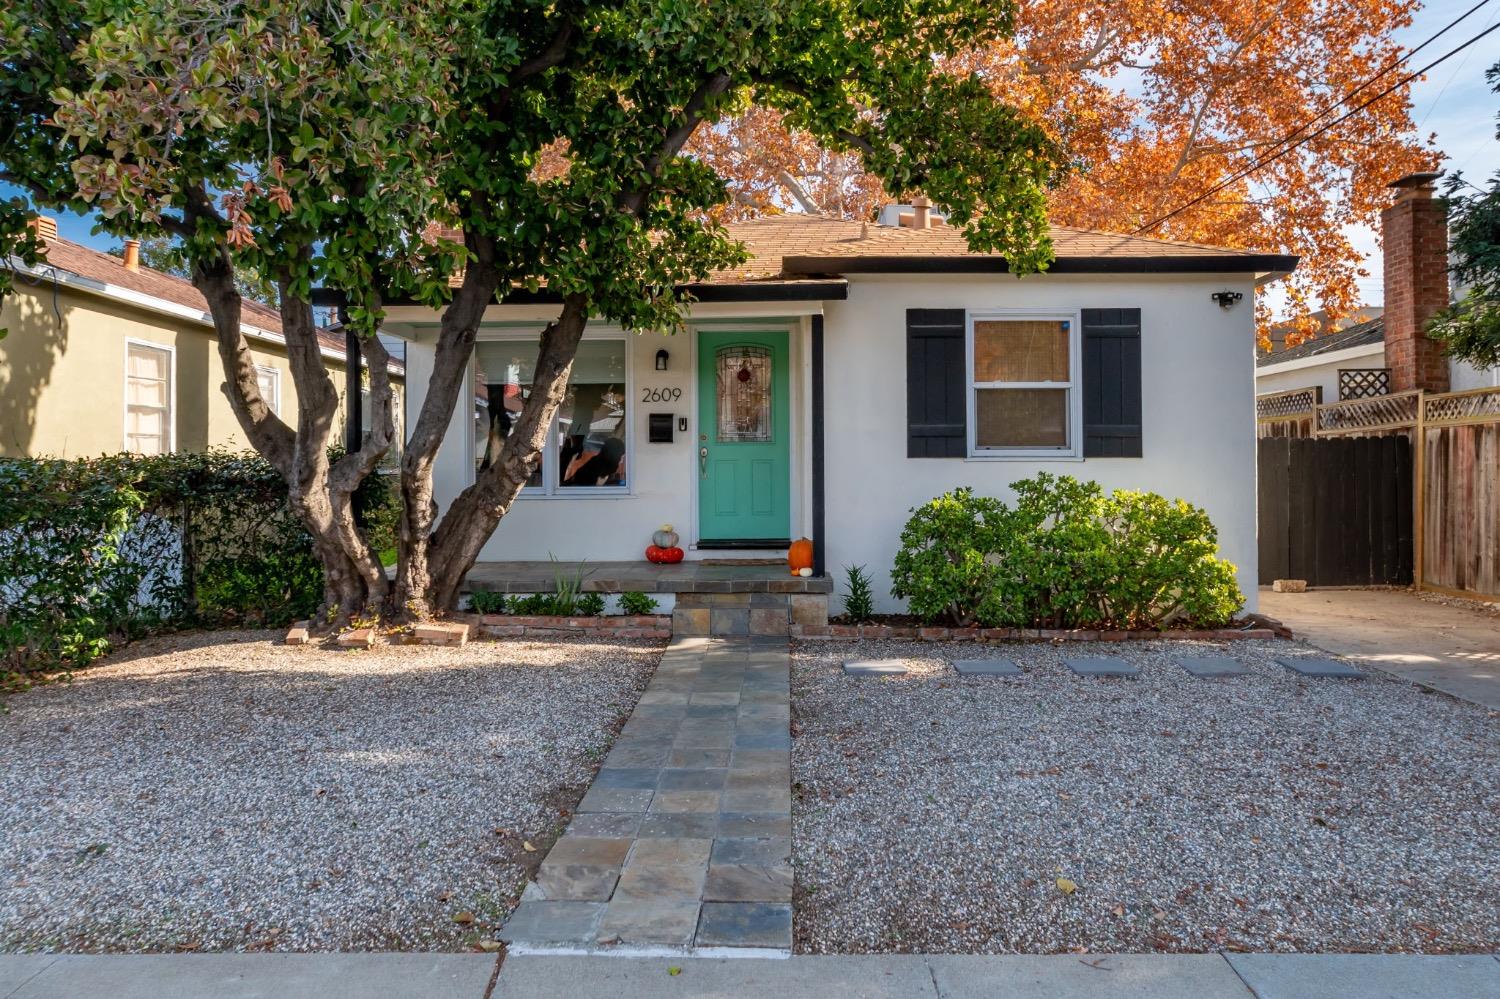 Charming 1930's Curtis Park bungalow on a beautiful tree-lined street in one of Sacramento's most de